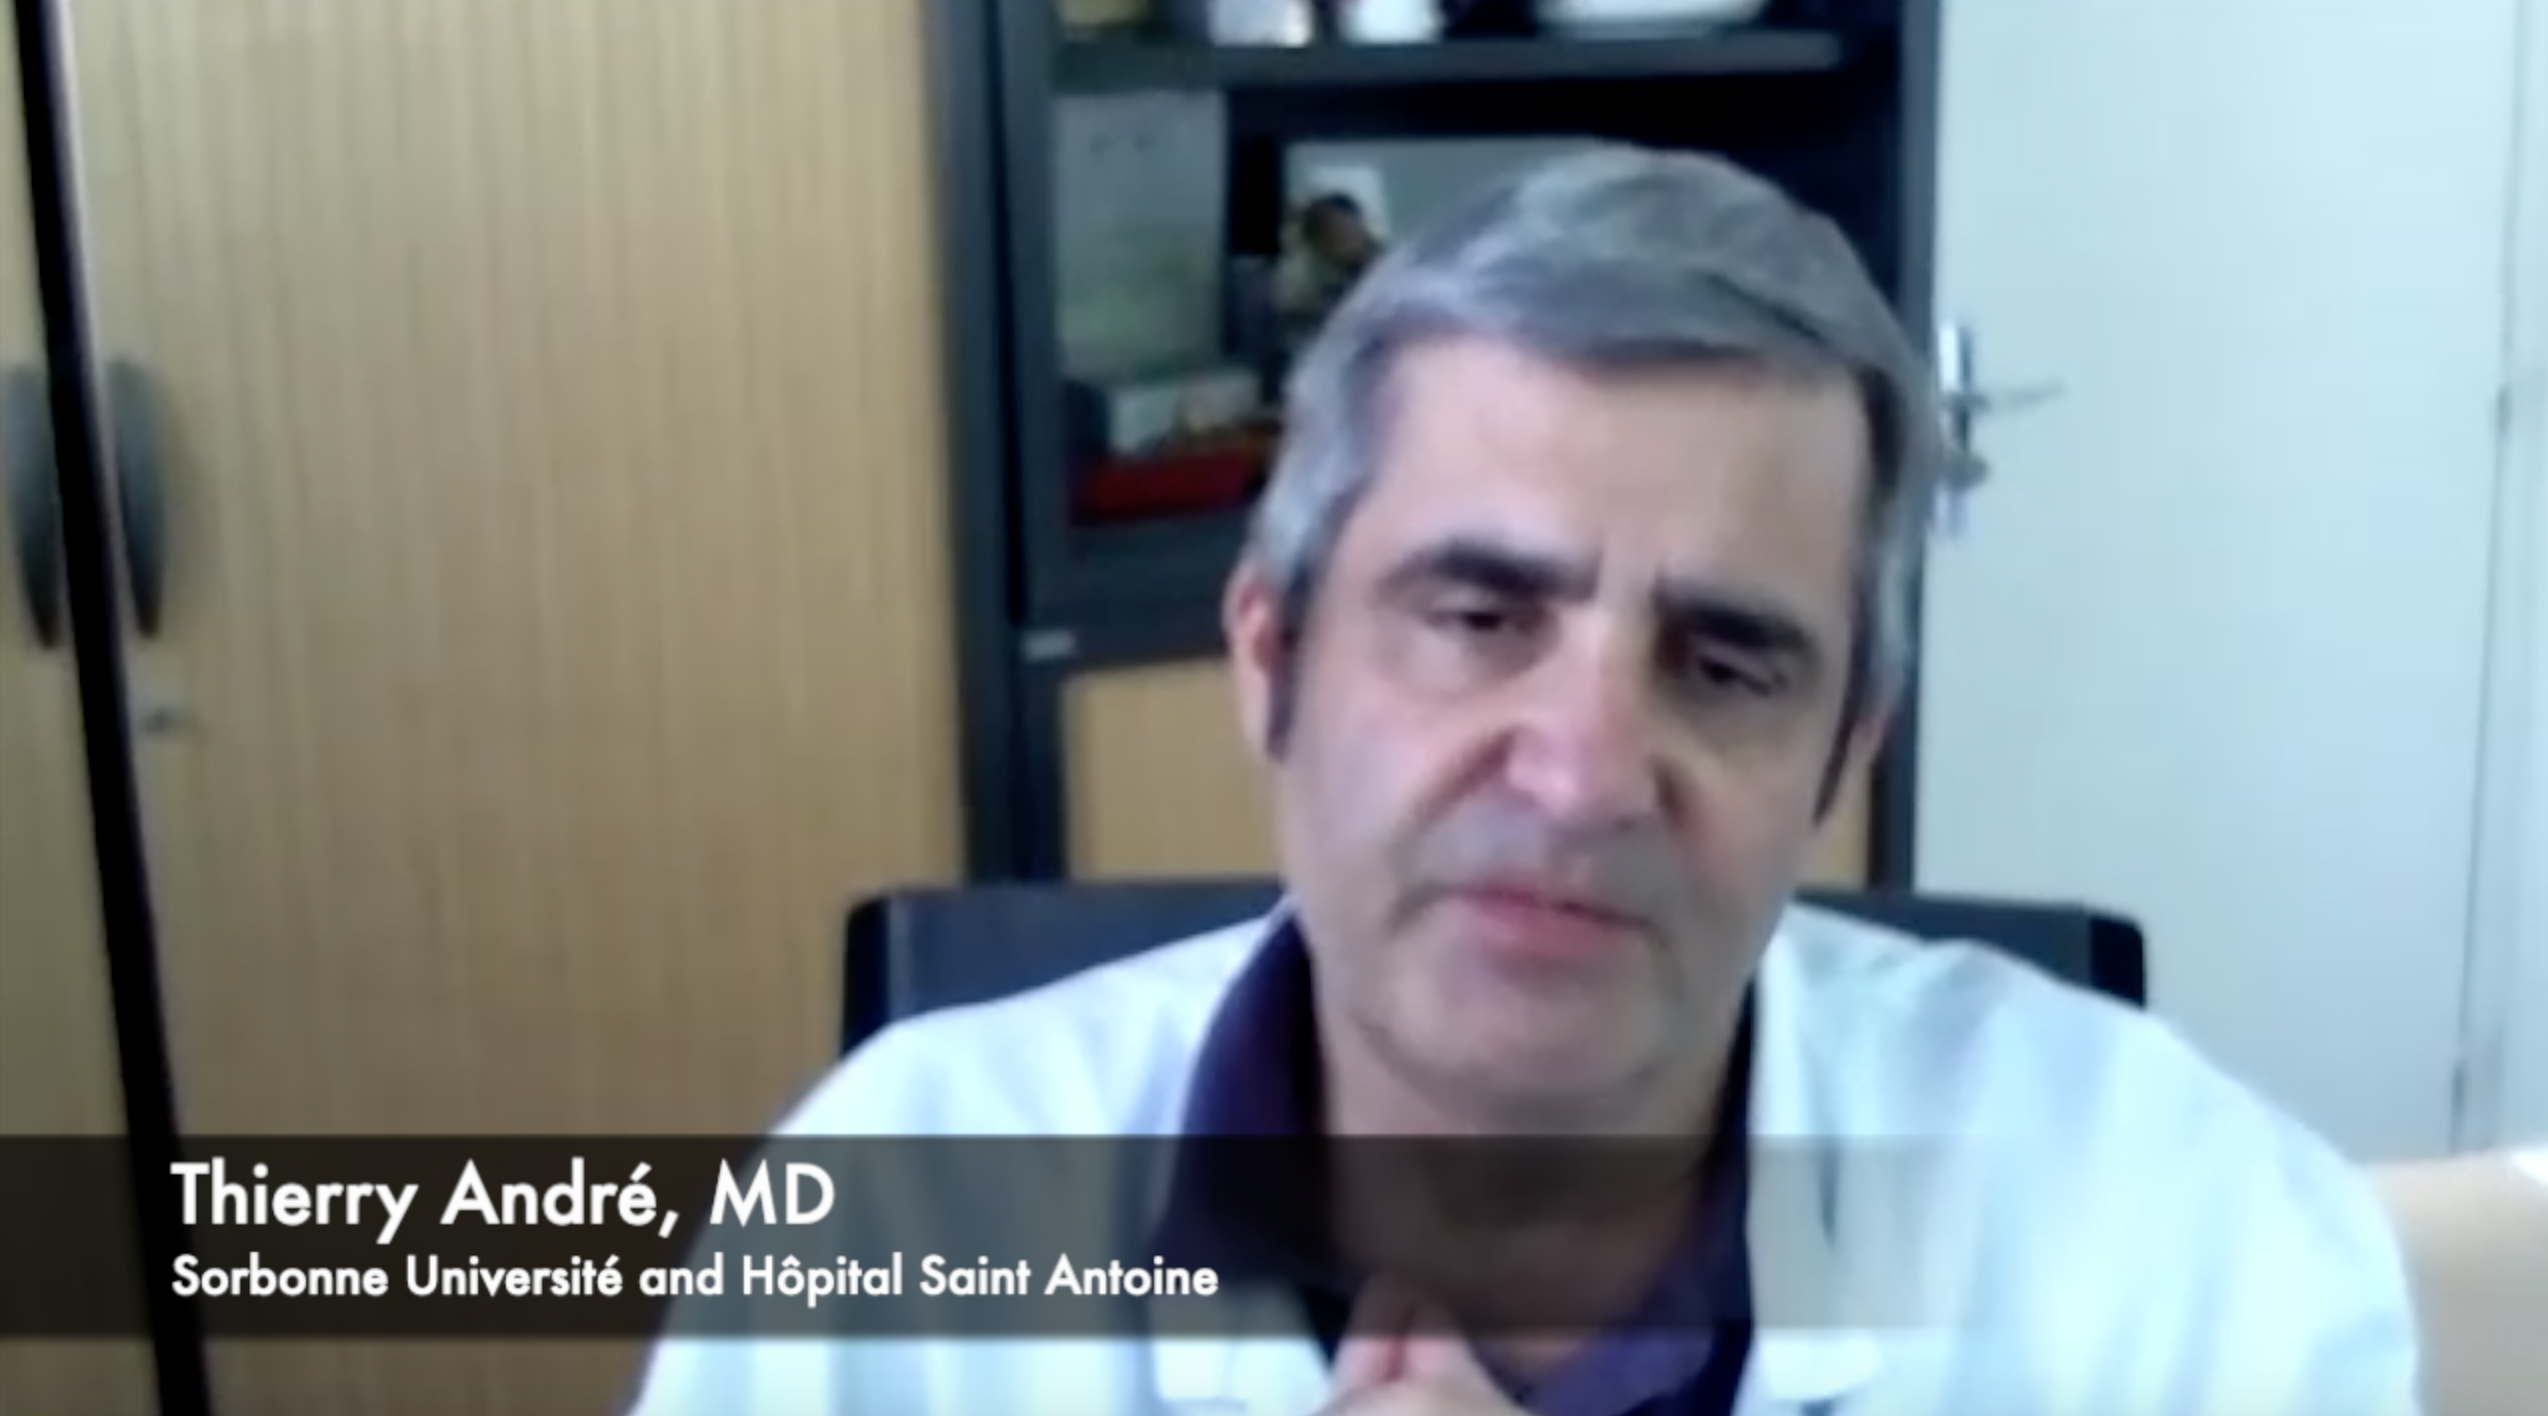 Thierry André, MD, on Interim Results from the Phase III Keynote-177 Study